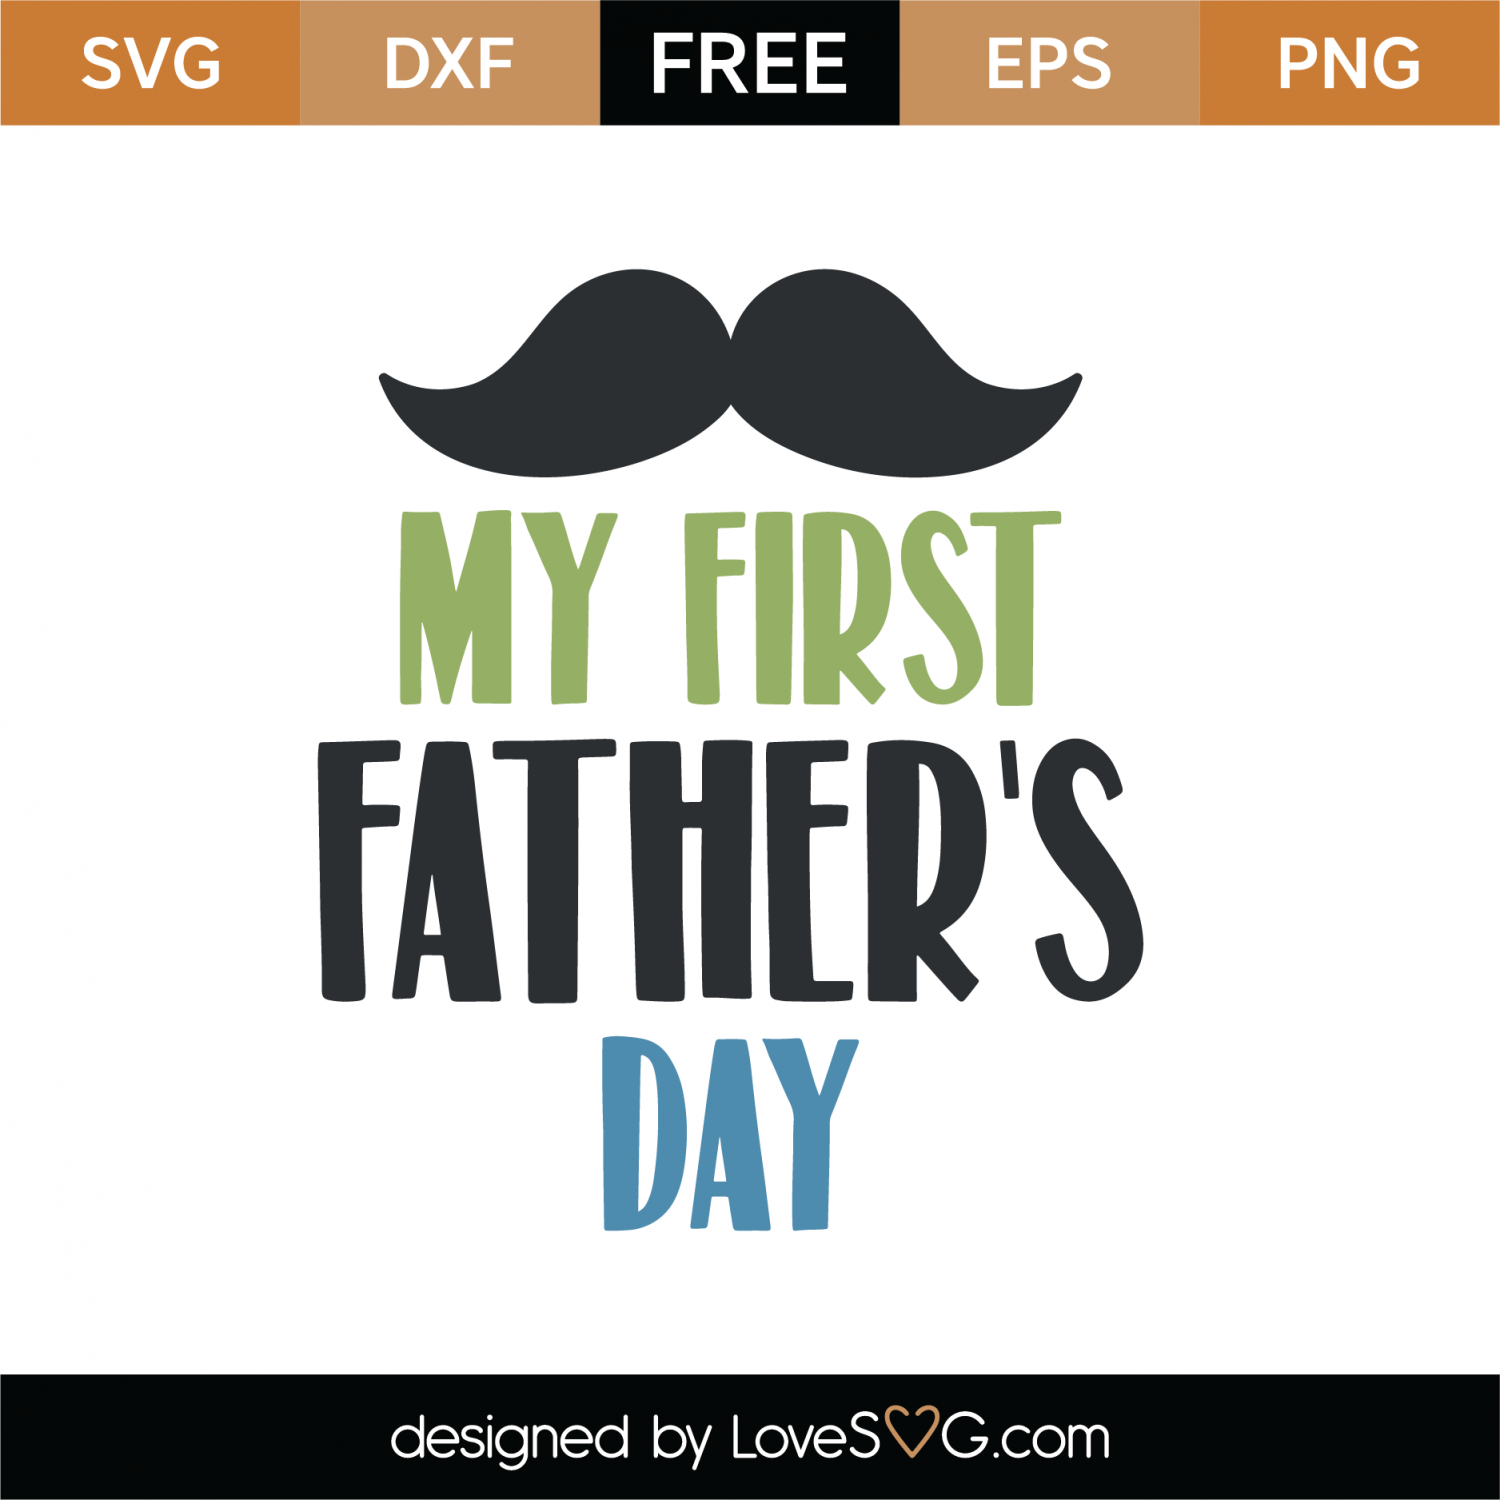 Download Free My First Father's Day SVG Cut File | Lovesvg.com